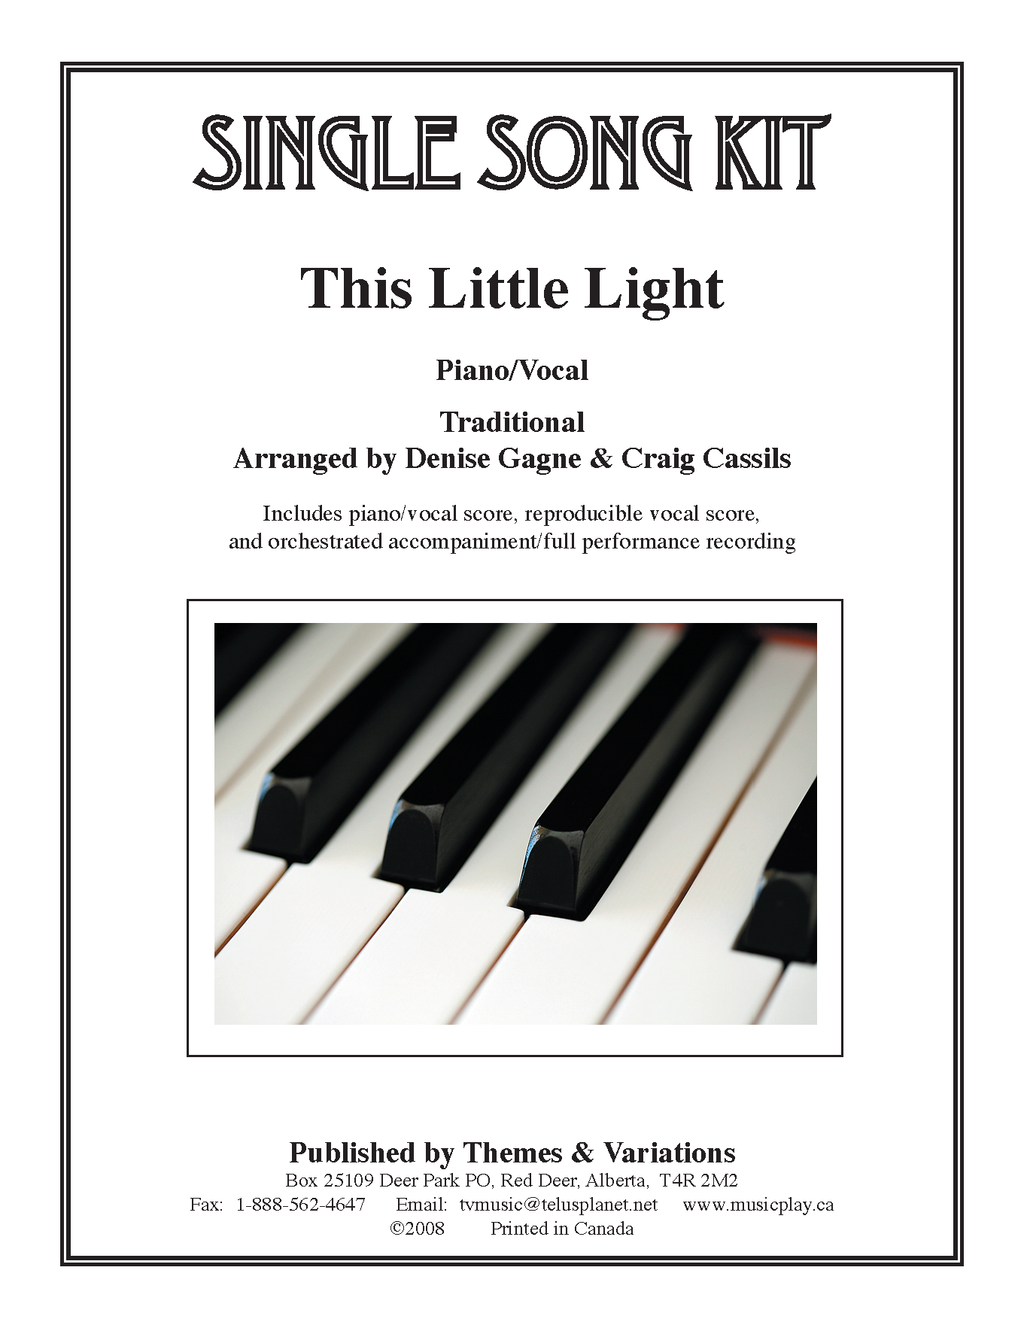 This Little Light Single Song Kit Download